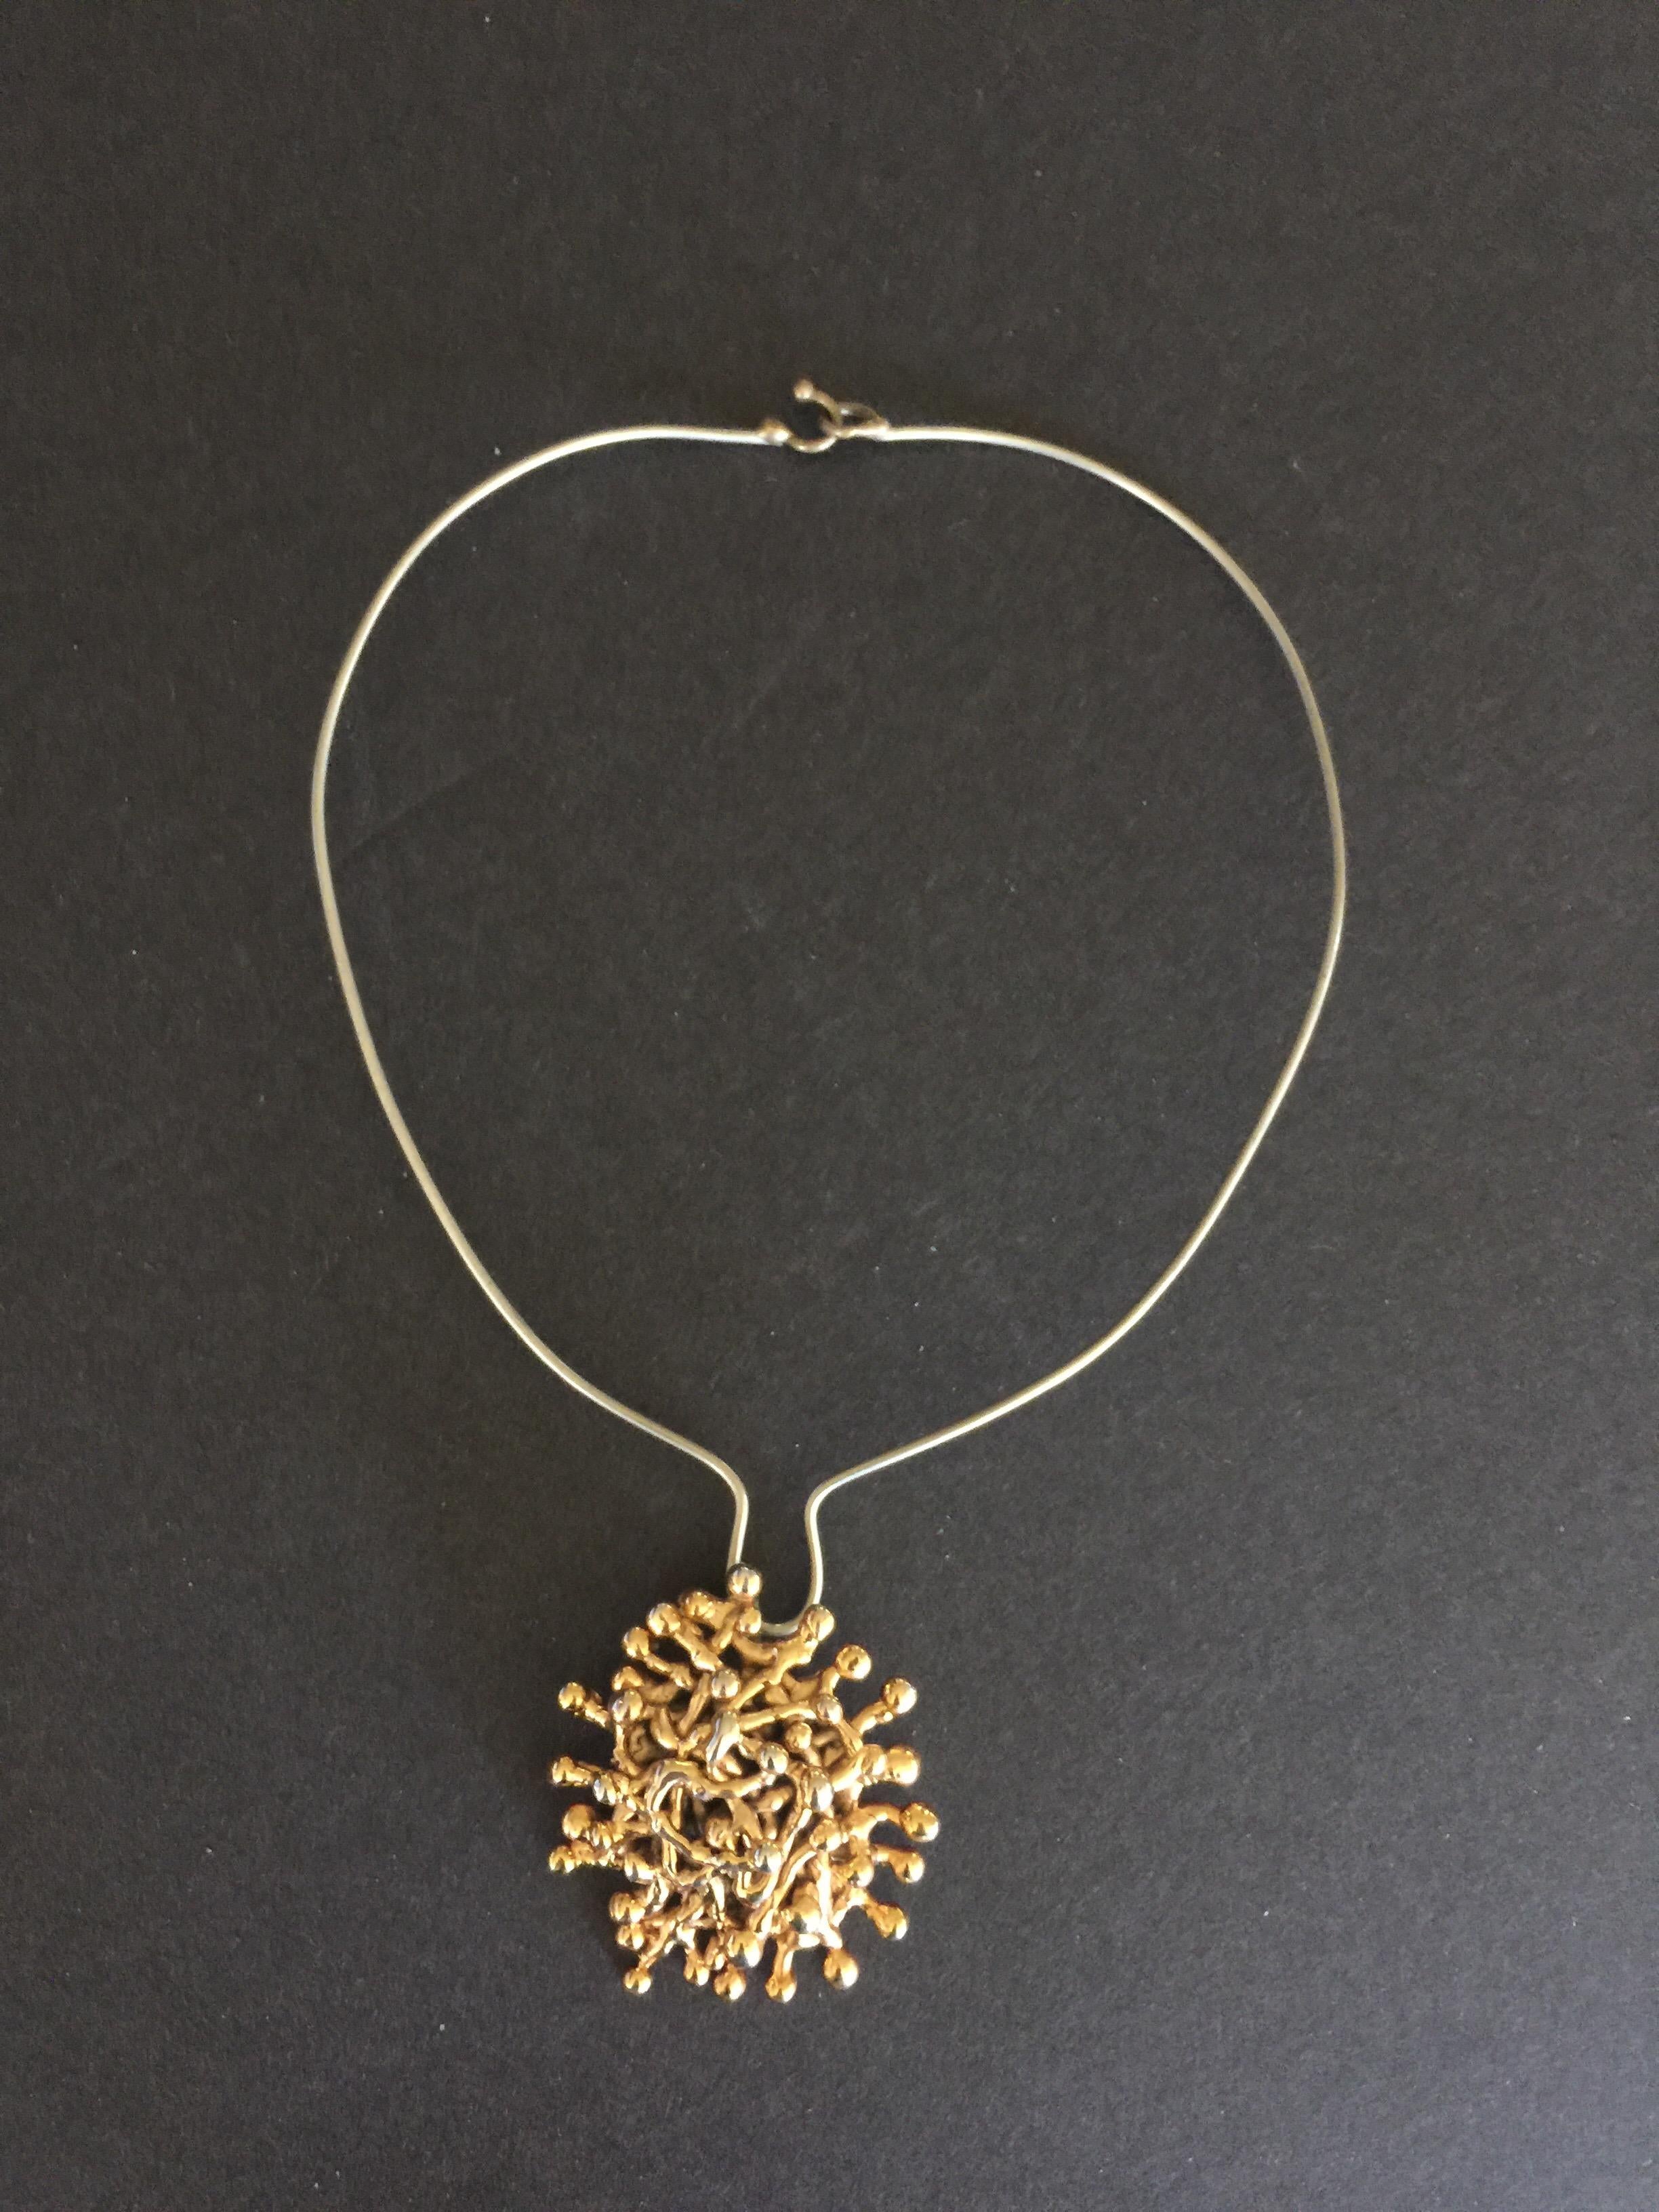 Modernist Gold on Bronze Pendant Necklace by Ibram Lassaw For Sale 4